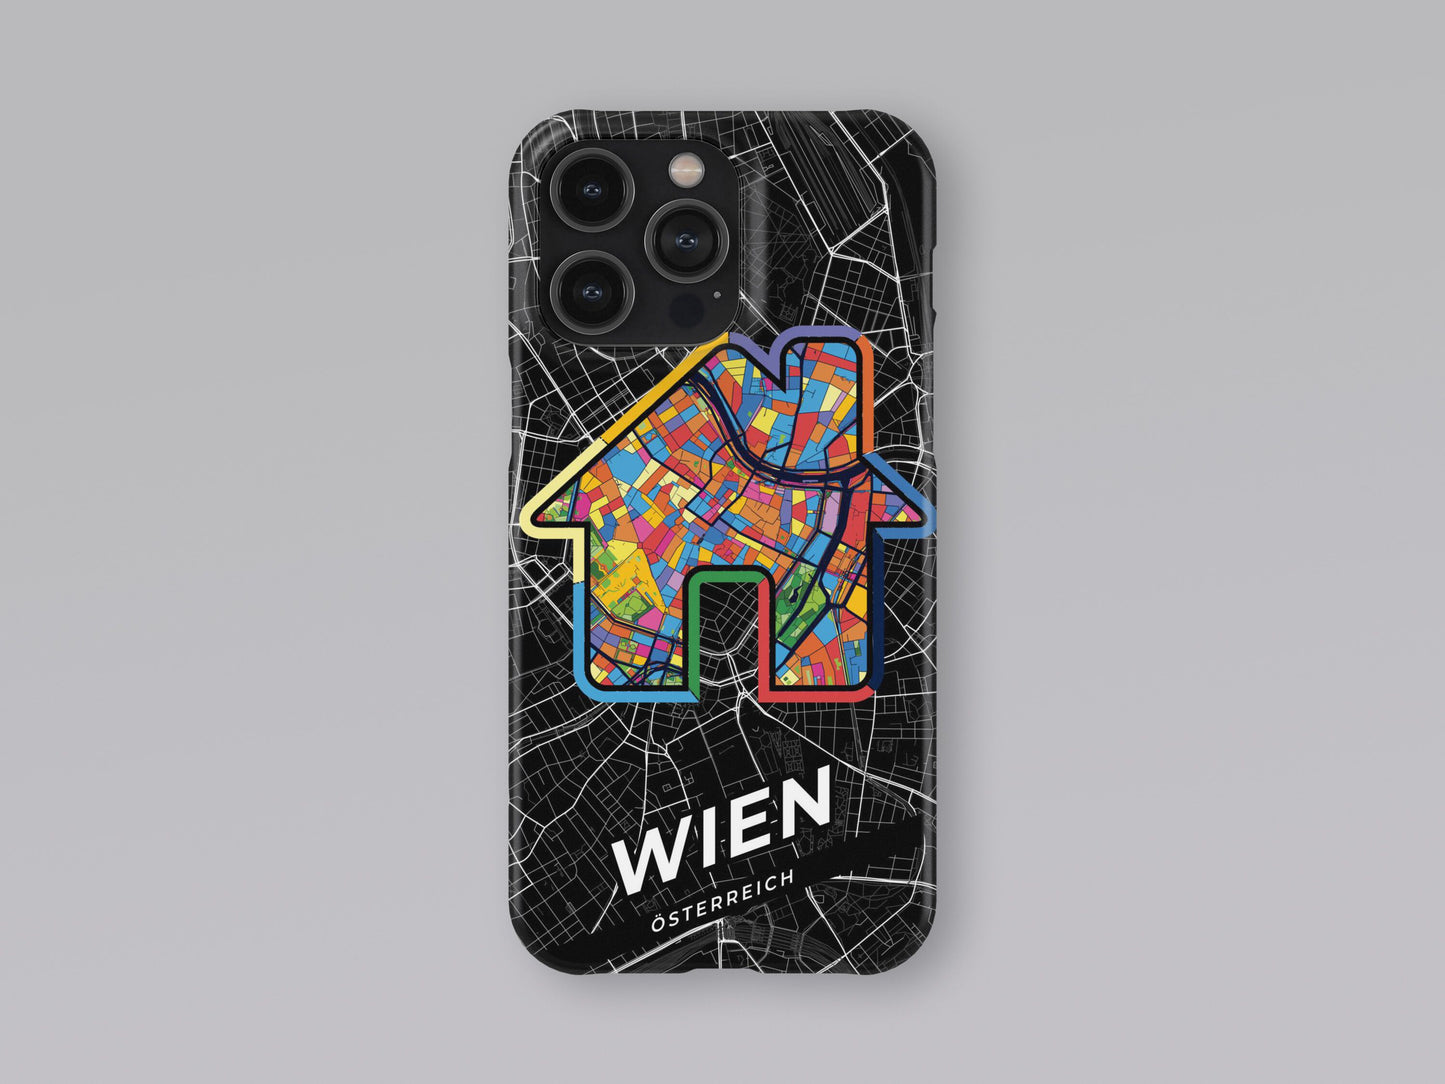 Wien Österreich slim phone case with colorful icon 3